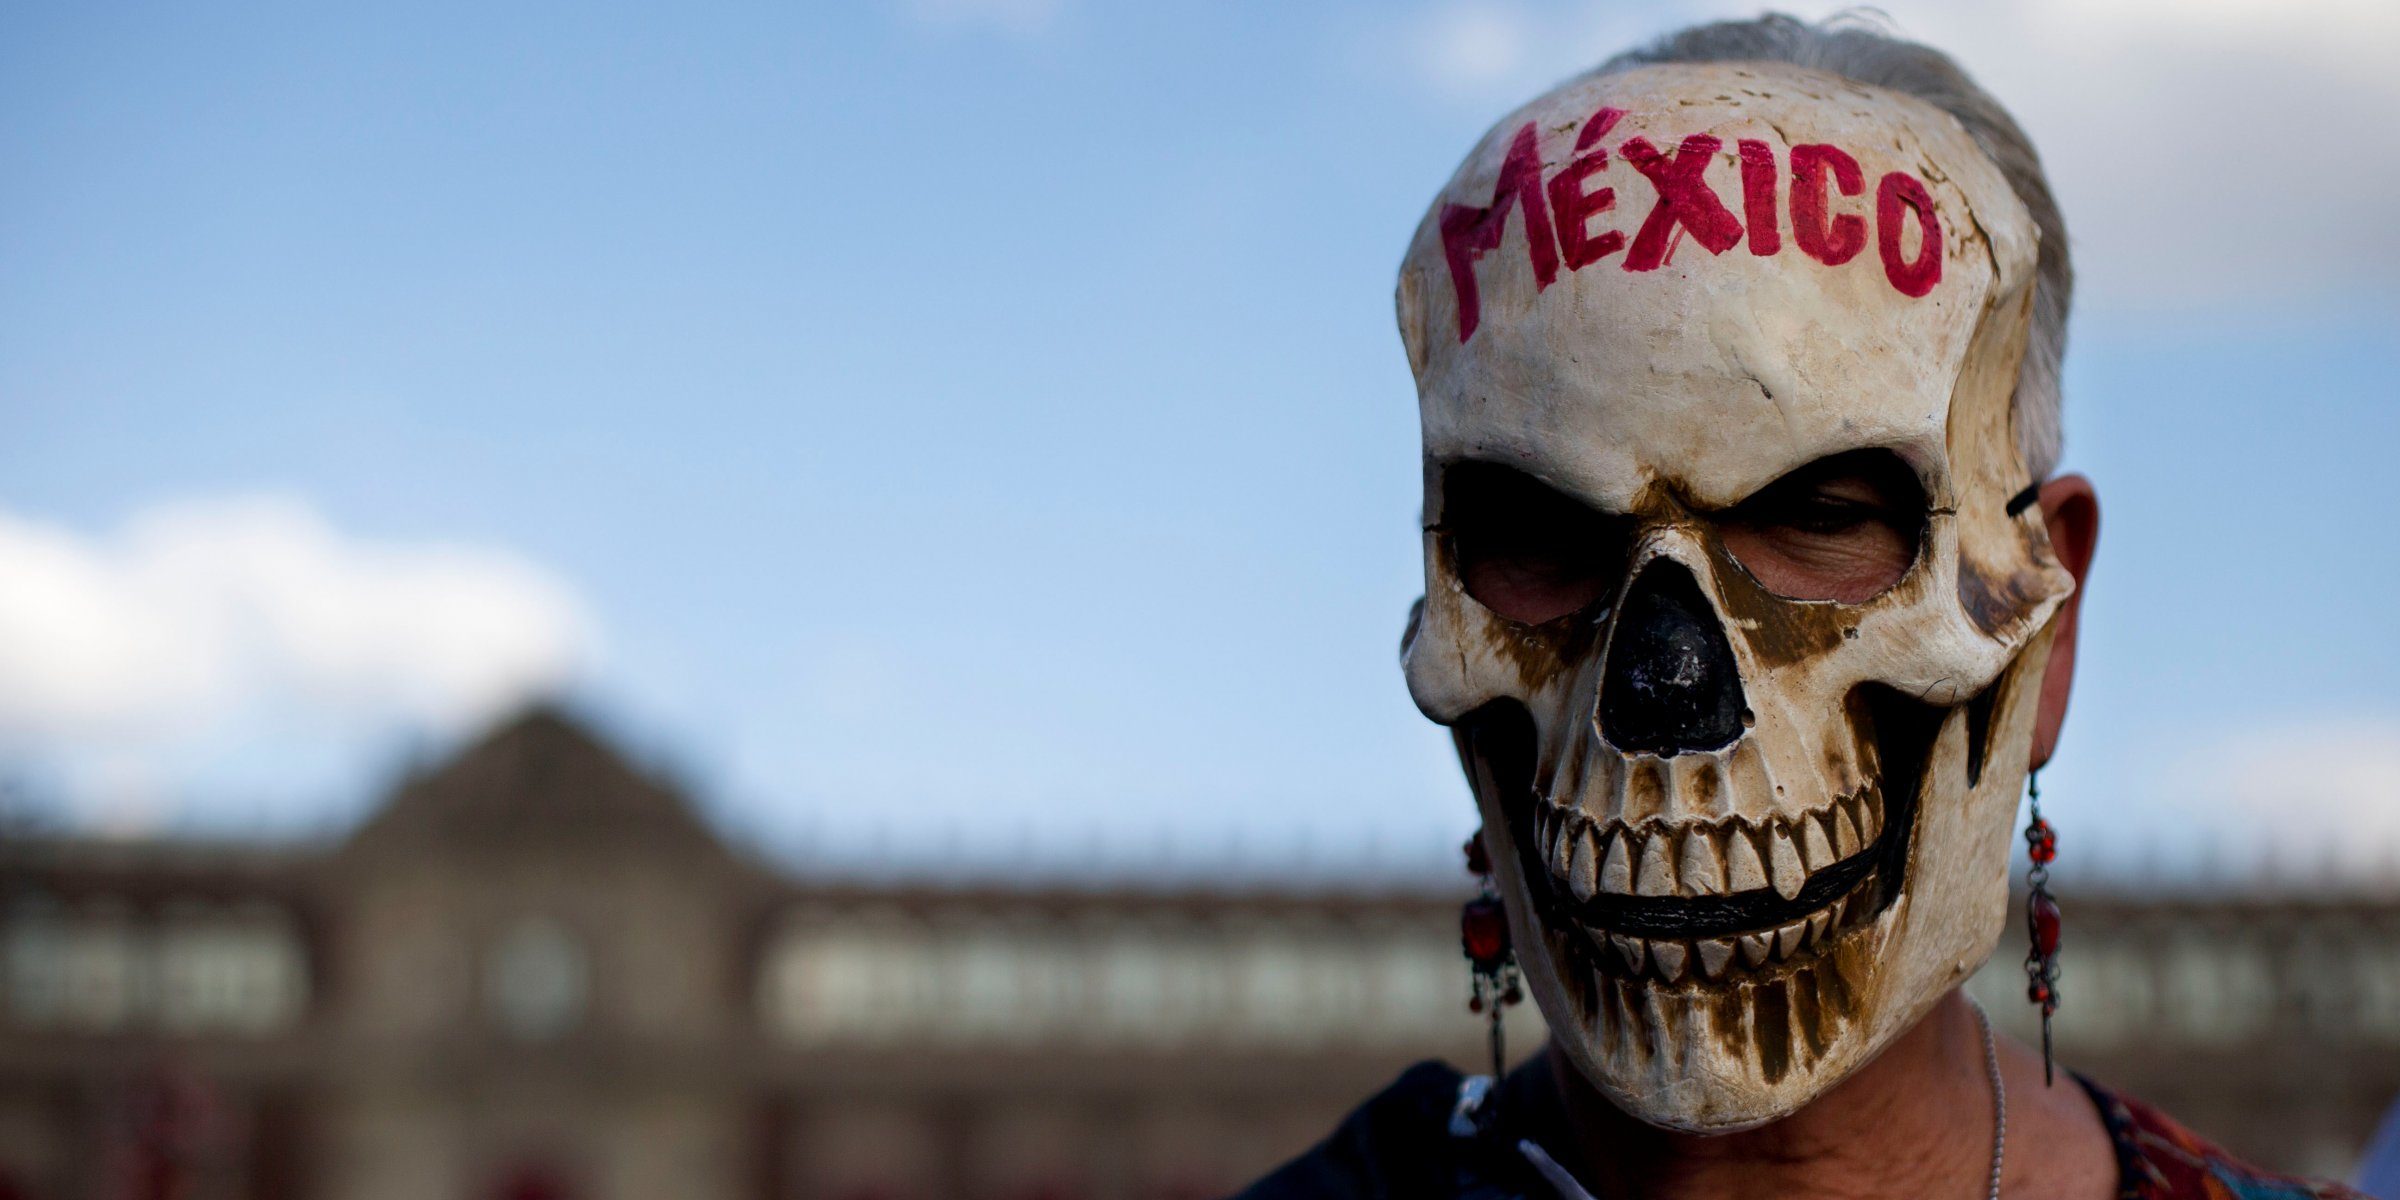 A woman wears a skull mask at National Palace Mexico